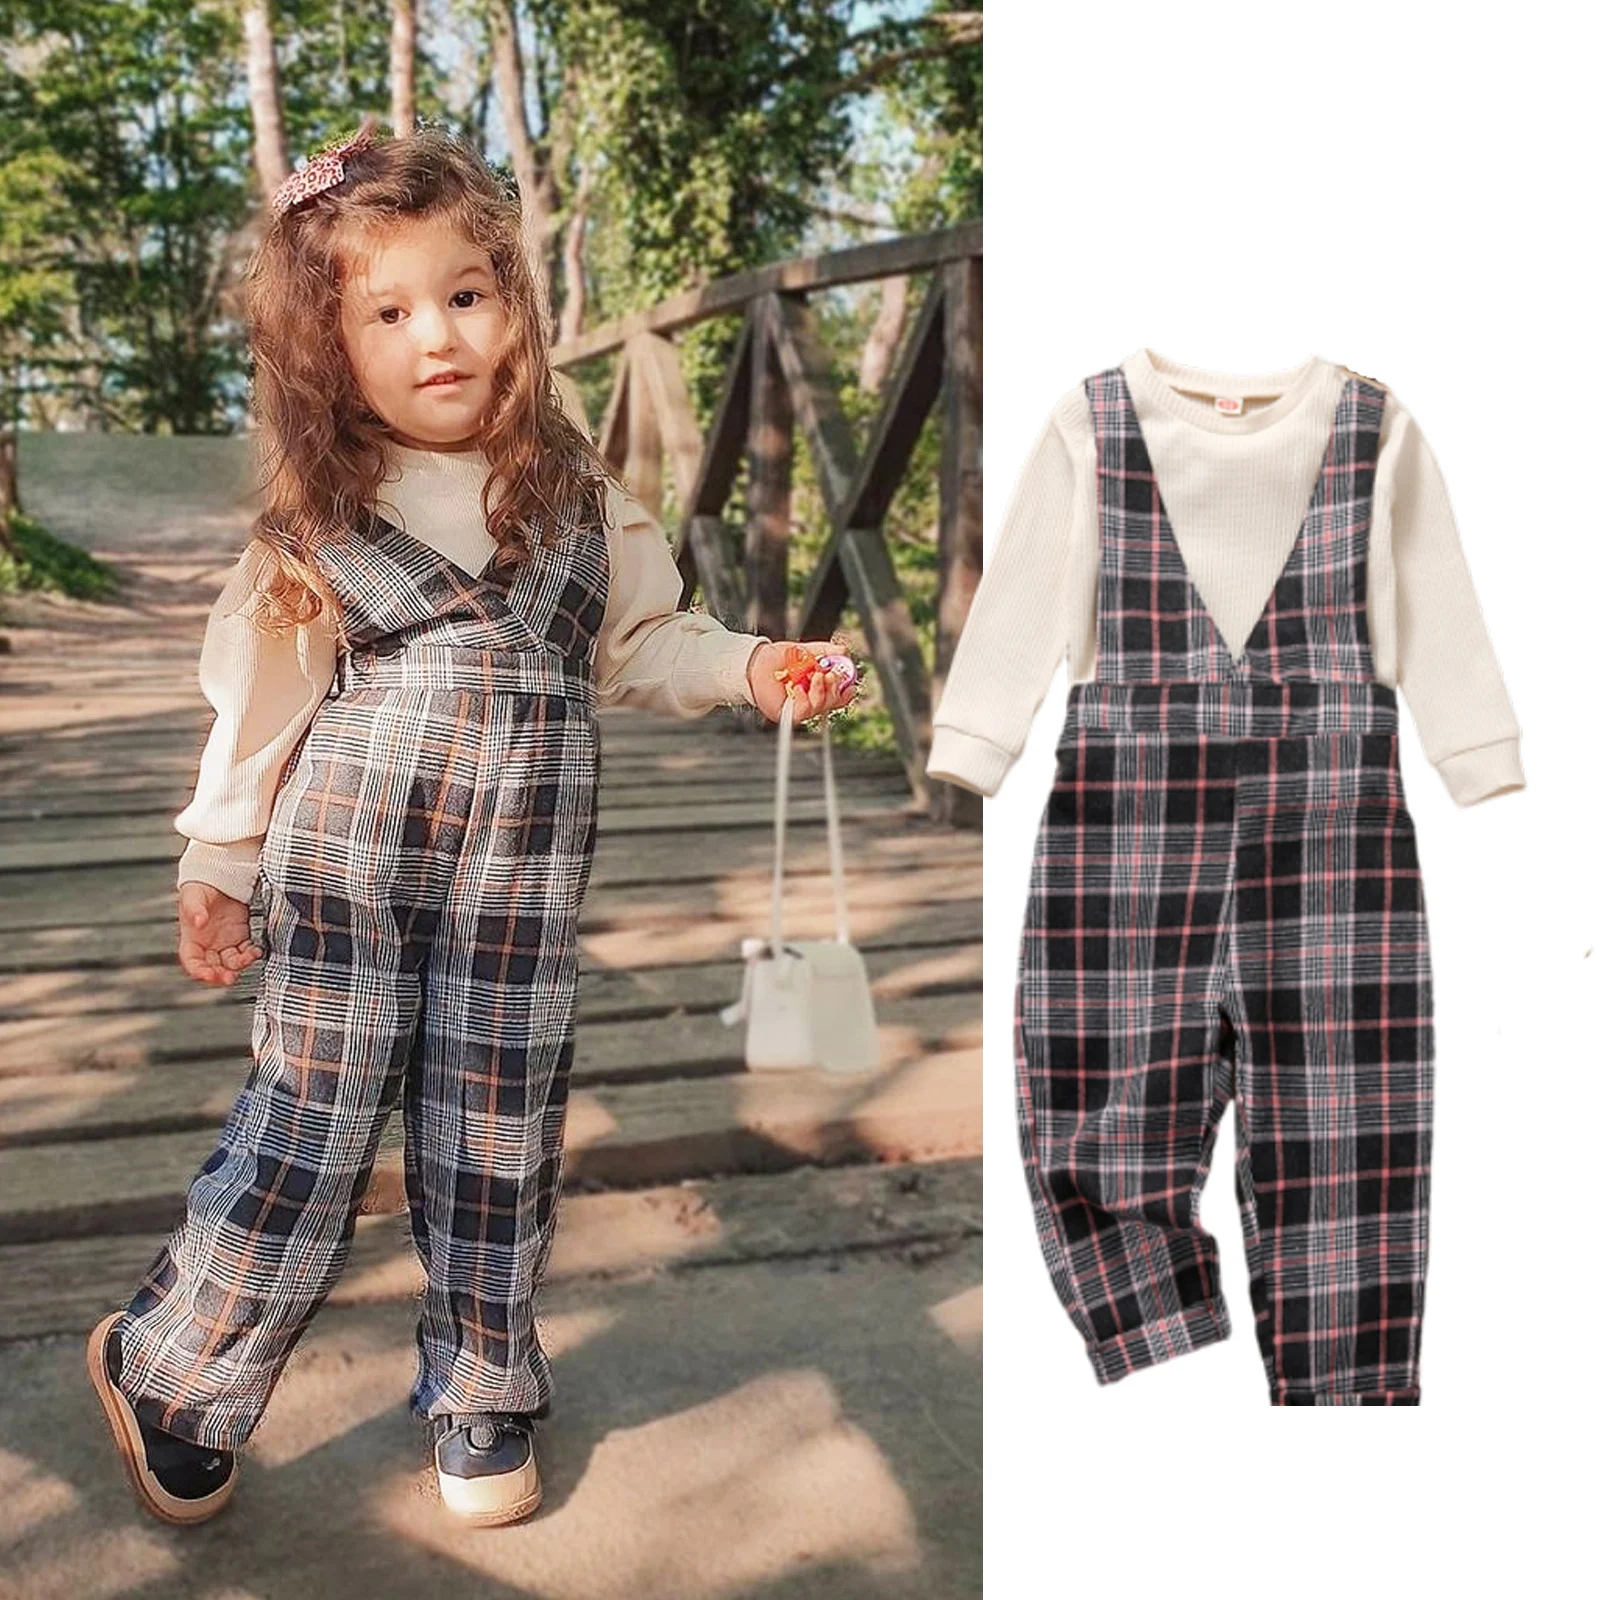 

Baby Girl Clothes Sets Solid Pullover Top Plaid Bib Pants Overalls 18M-6Y Toddler Kids Spring Fall Casual Cotton Outfits 2021